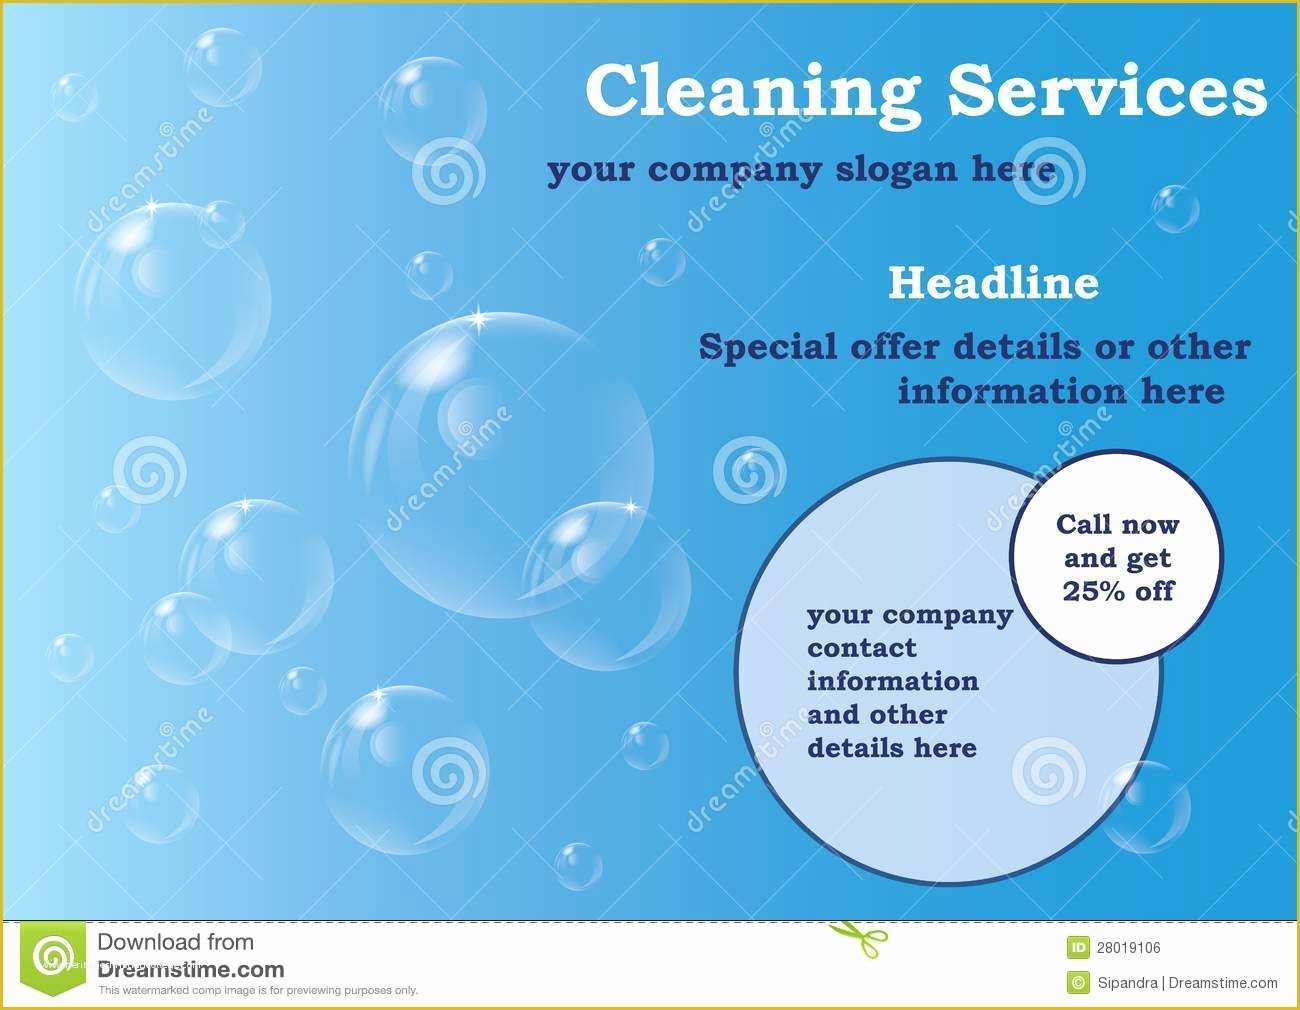 Cleaning Service Flyer Template Free Of Cleaning Services Flyer Template Royalty Free Stock Image